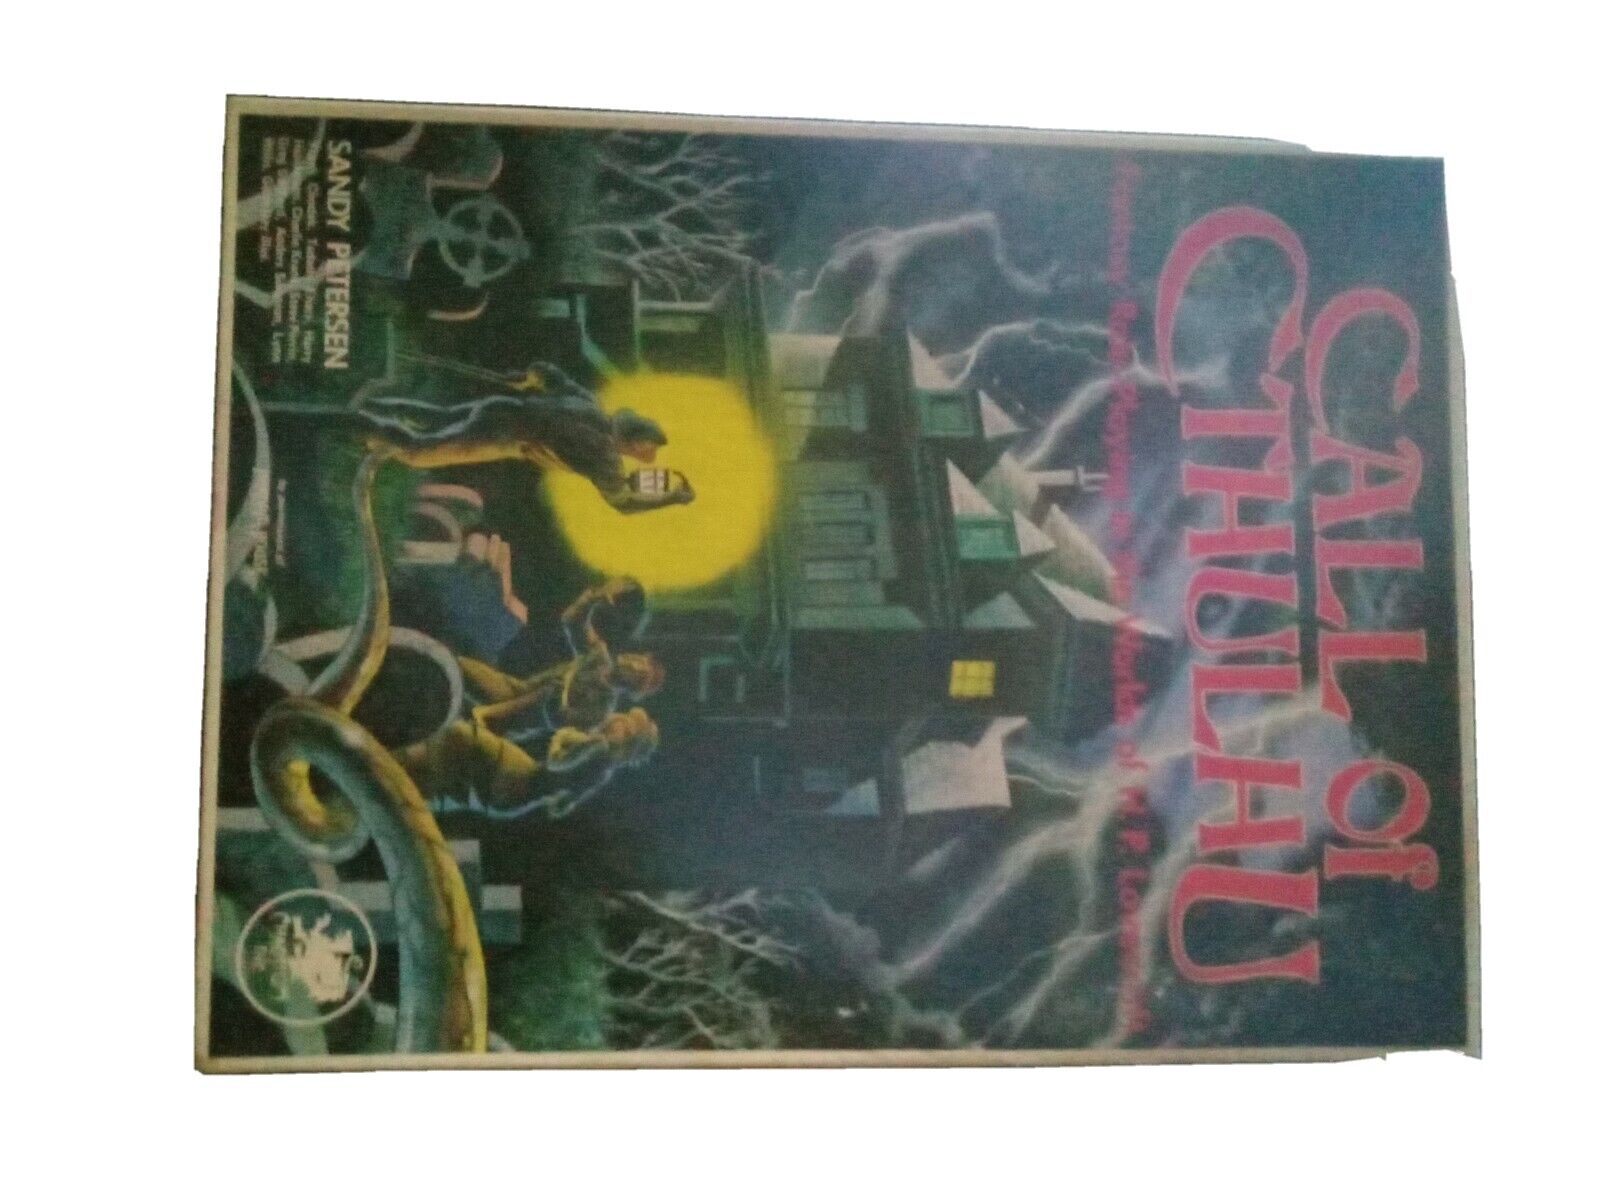 Chaosium : Call of Cthulhu game - Lovecraft RPG 2009-X